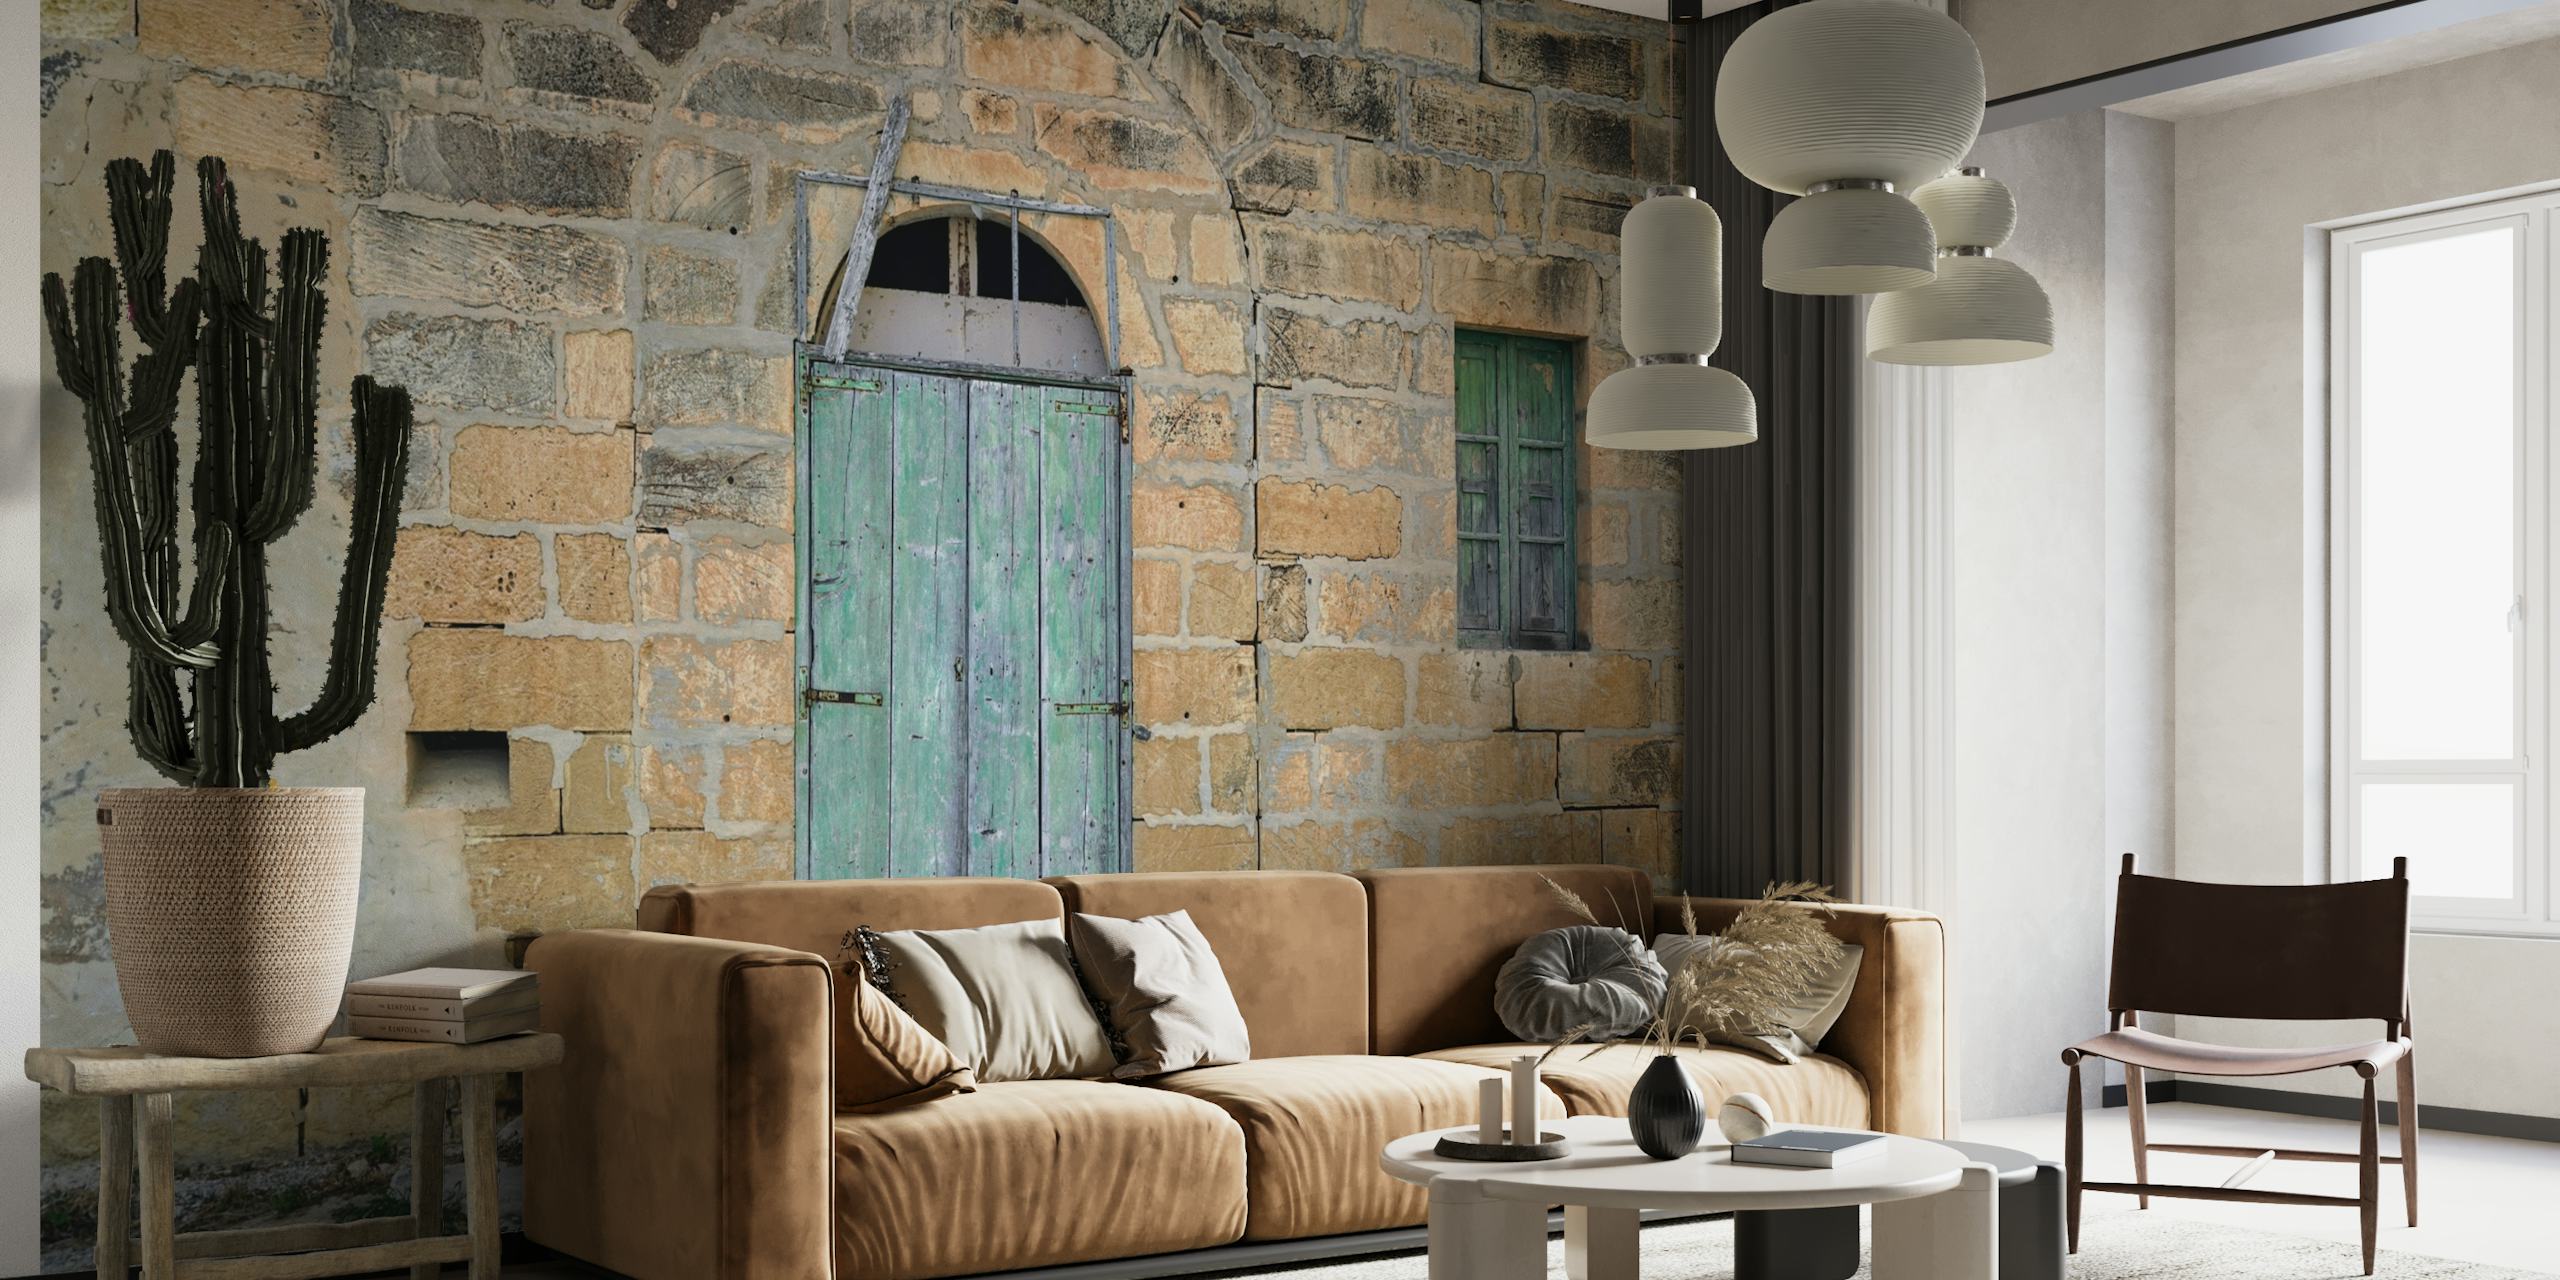 Old country house wall mural with weathered stone walls and a rustic green door